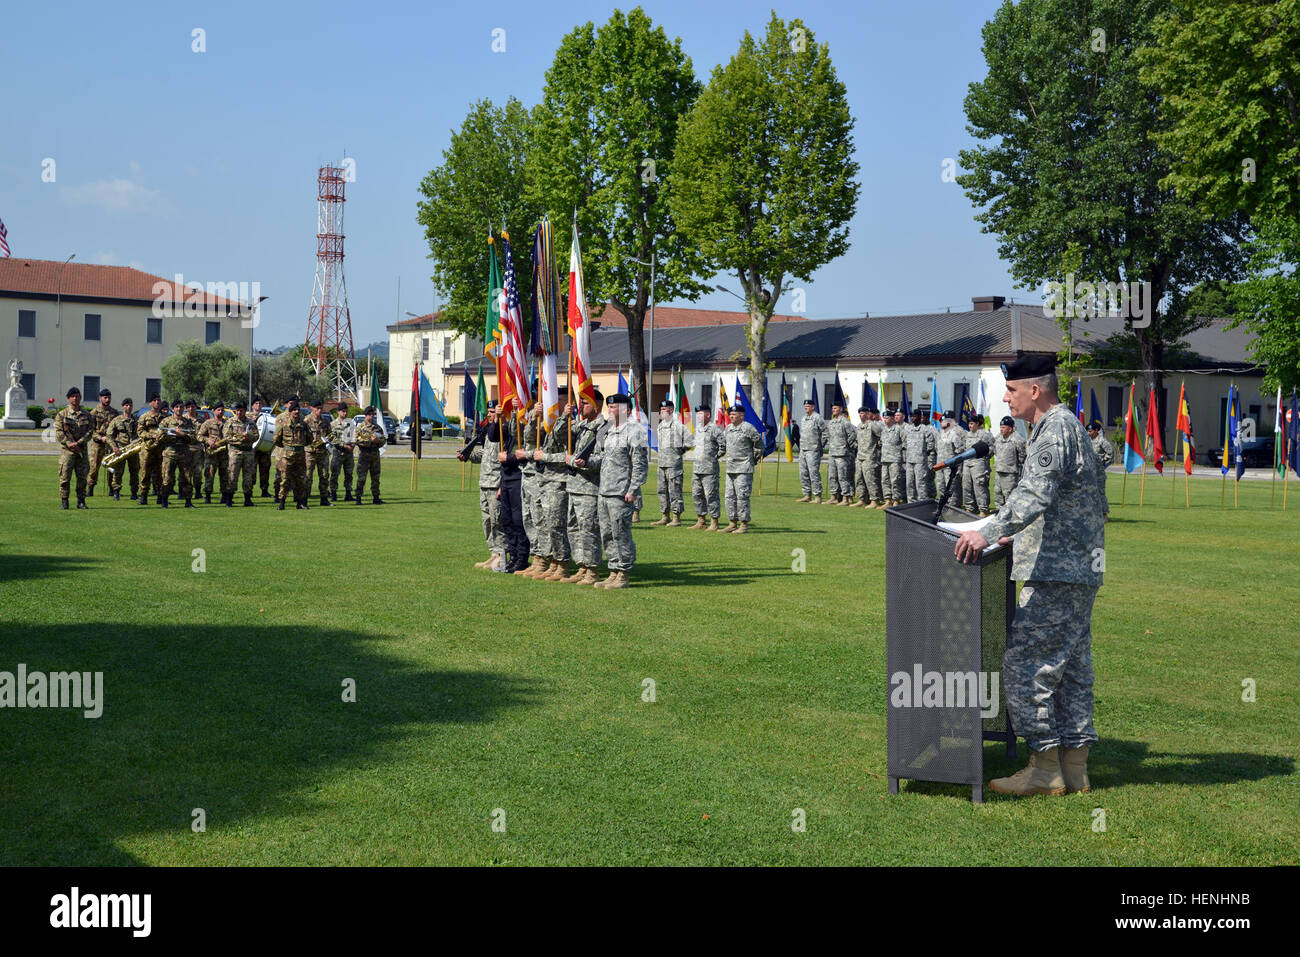 U.S. Army Gen. David M. Rodriguez, at the podium, the commanding general of U.S. Africa Command, addresses the audience during the change of command ceremony of U.S. Army Africa (USARAF)   on the grounds of Hoekstra Field, at Caserma Ederle, in Vicenza, Italy, June 3, 2014. Rodriguez presided over the ceremony, where Maj. Gen. Patrick J. Donahue II, the outgoing commander relinquished command of USARAF, Southern European Task Force to Maj. Gen. Darryl A. Williams. (U.S. Army photo by Paolo Bovo/Released) U.S. Army Gen. David M. Rodriguez, at the podium, the commanding general of U.S. Africa Co Stock Photo